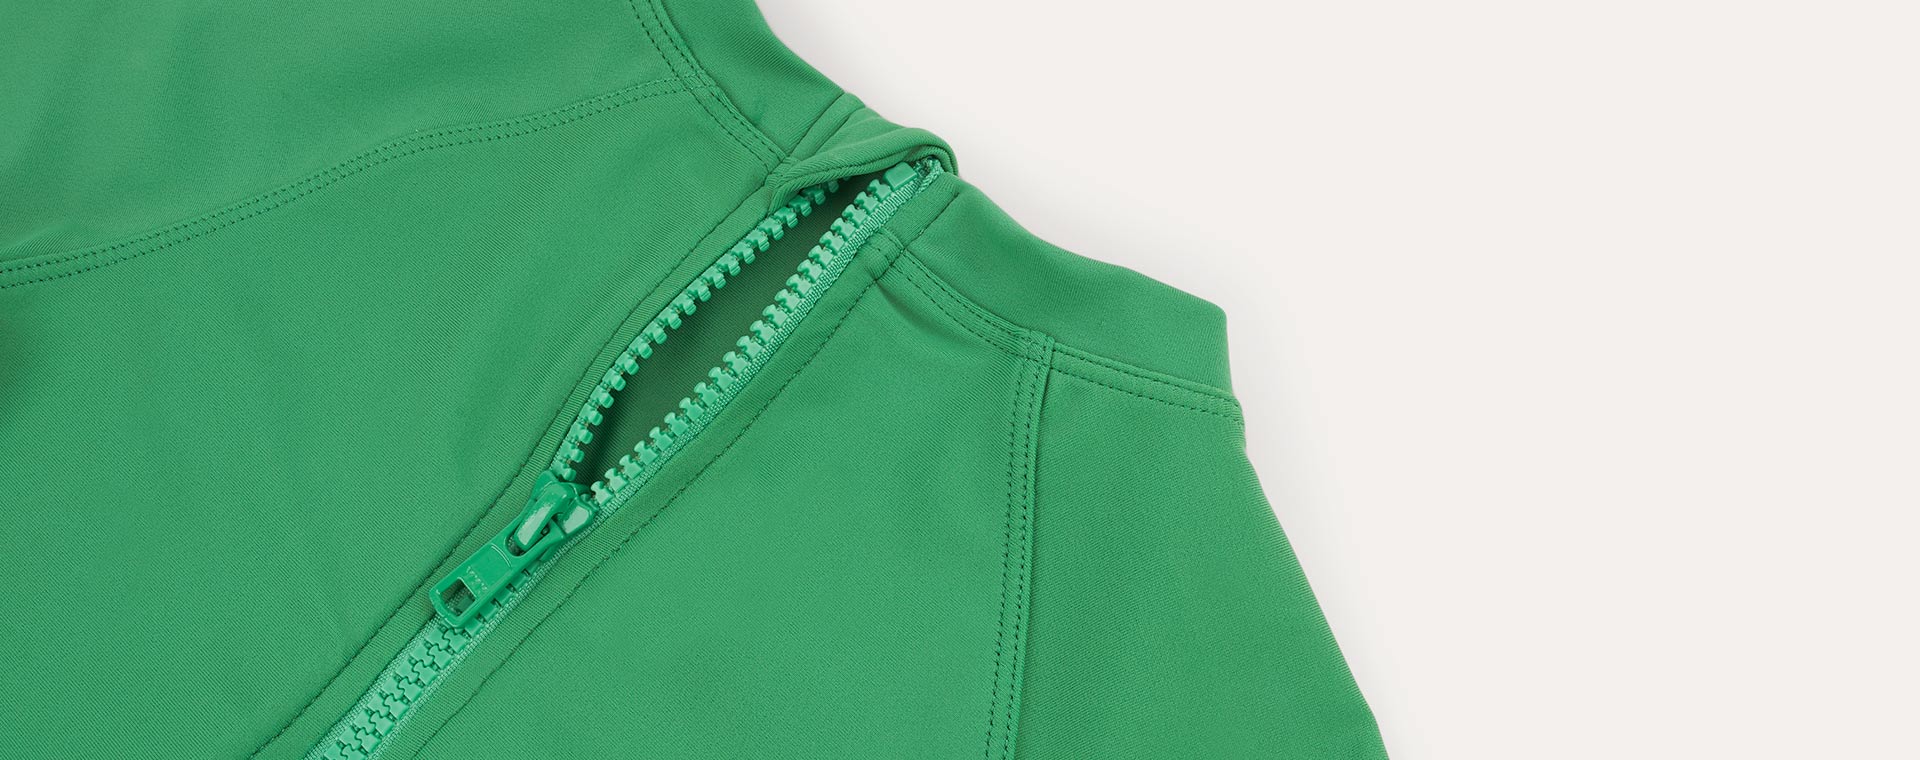 Grass Green KIDLY Label Recycled Long Sleeve Swimsuit